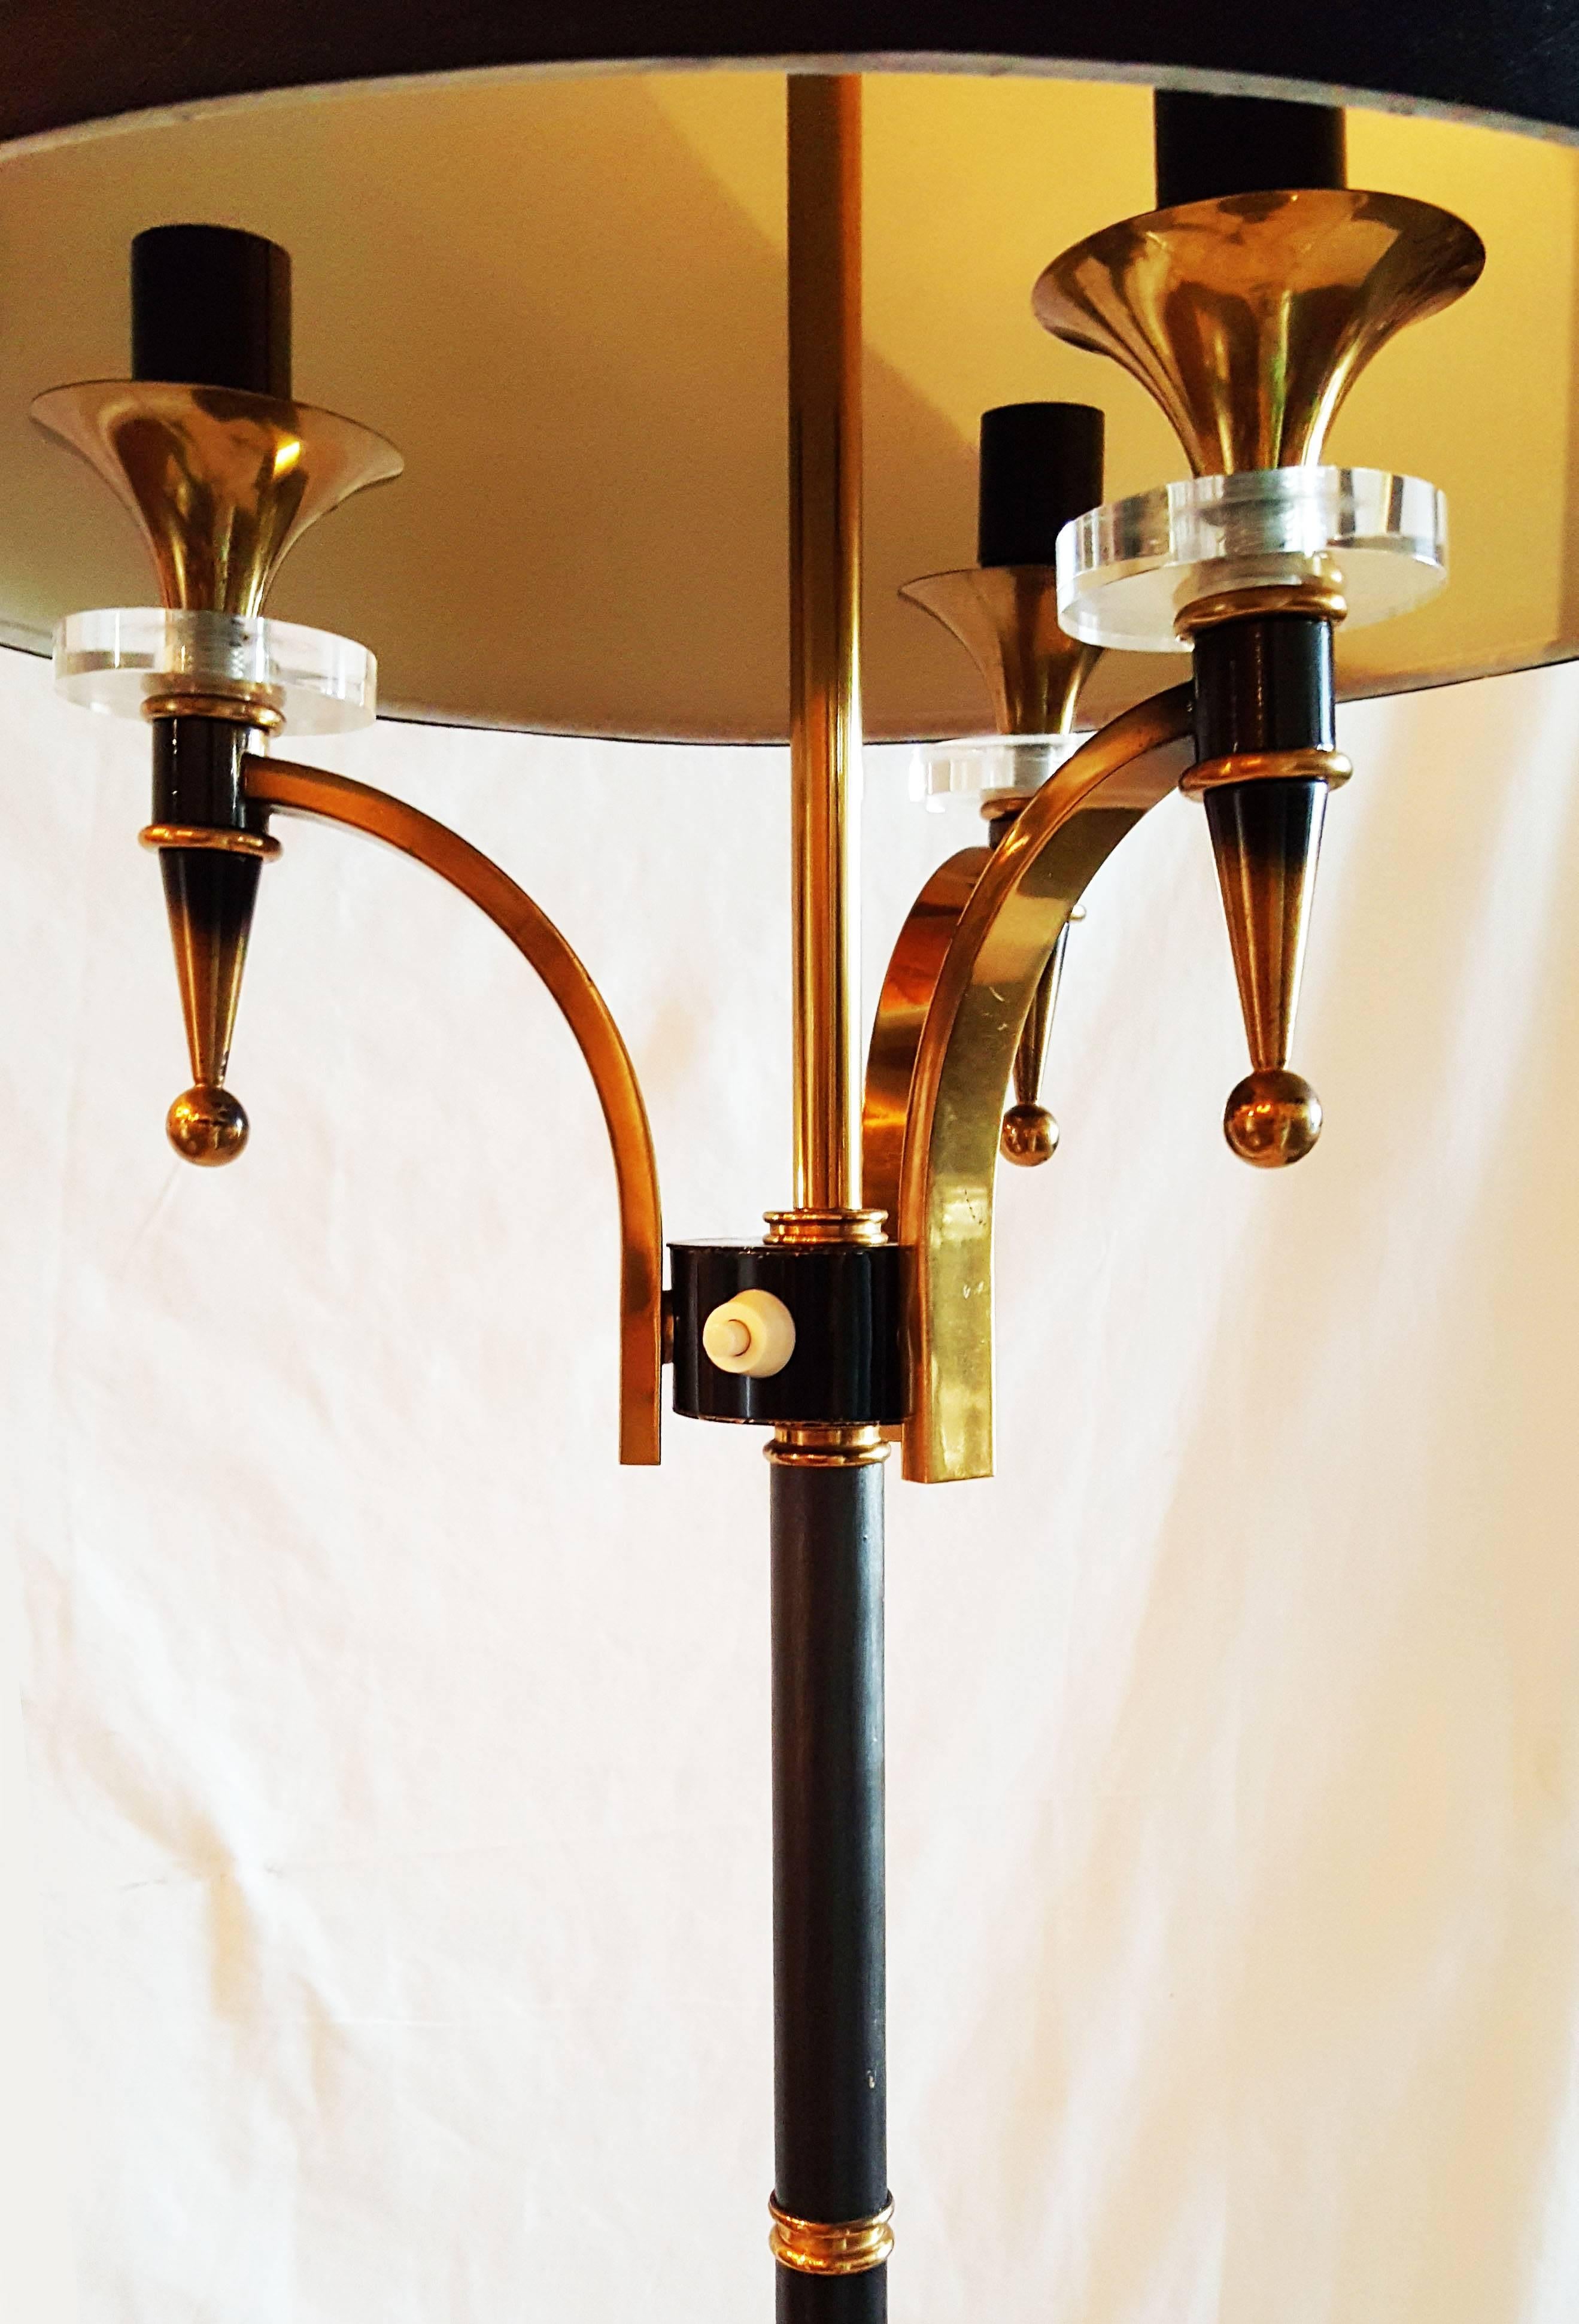 Superb Maison Jansen Mid-Century Modern Floor Lamp, two patinas, Brass and Gun Metal, made in France in the 1960s.
It takes three light bulbs, 75 watts max per light.
US rewired and in working condition.
No Shade.